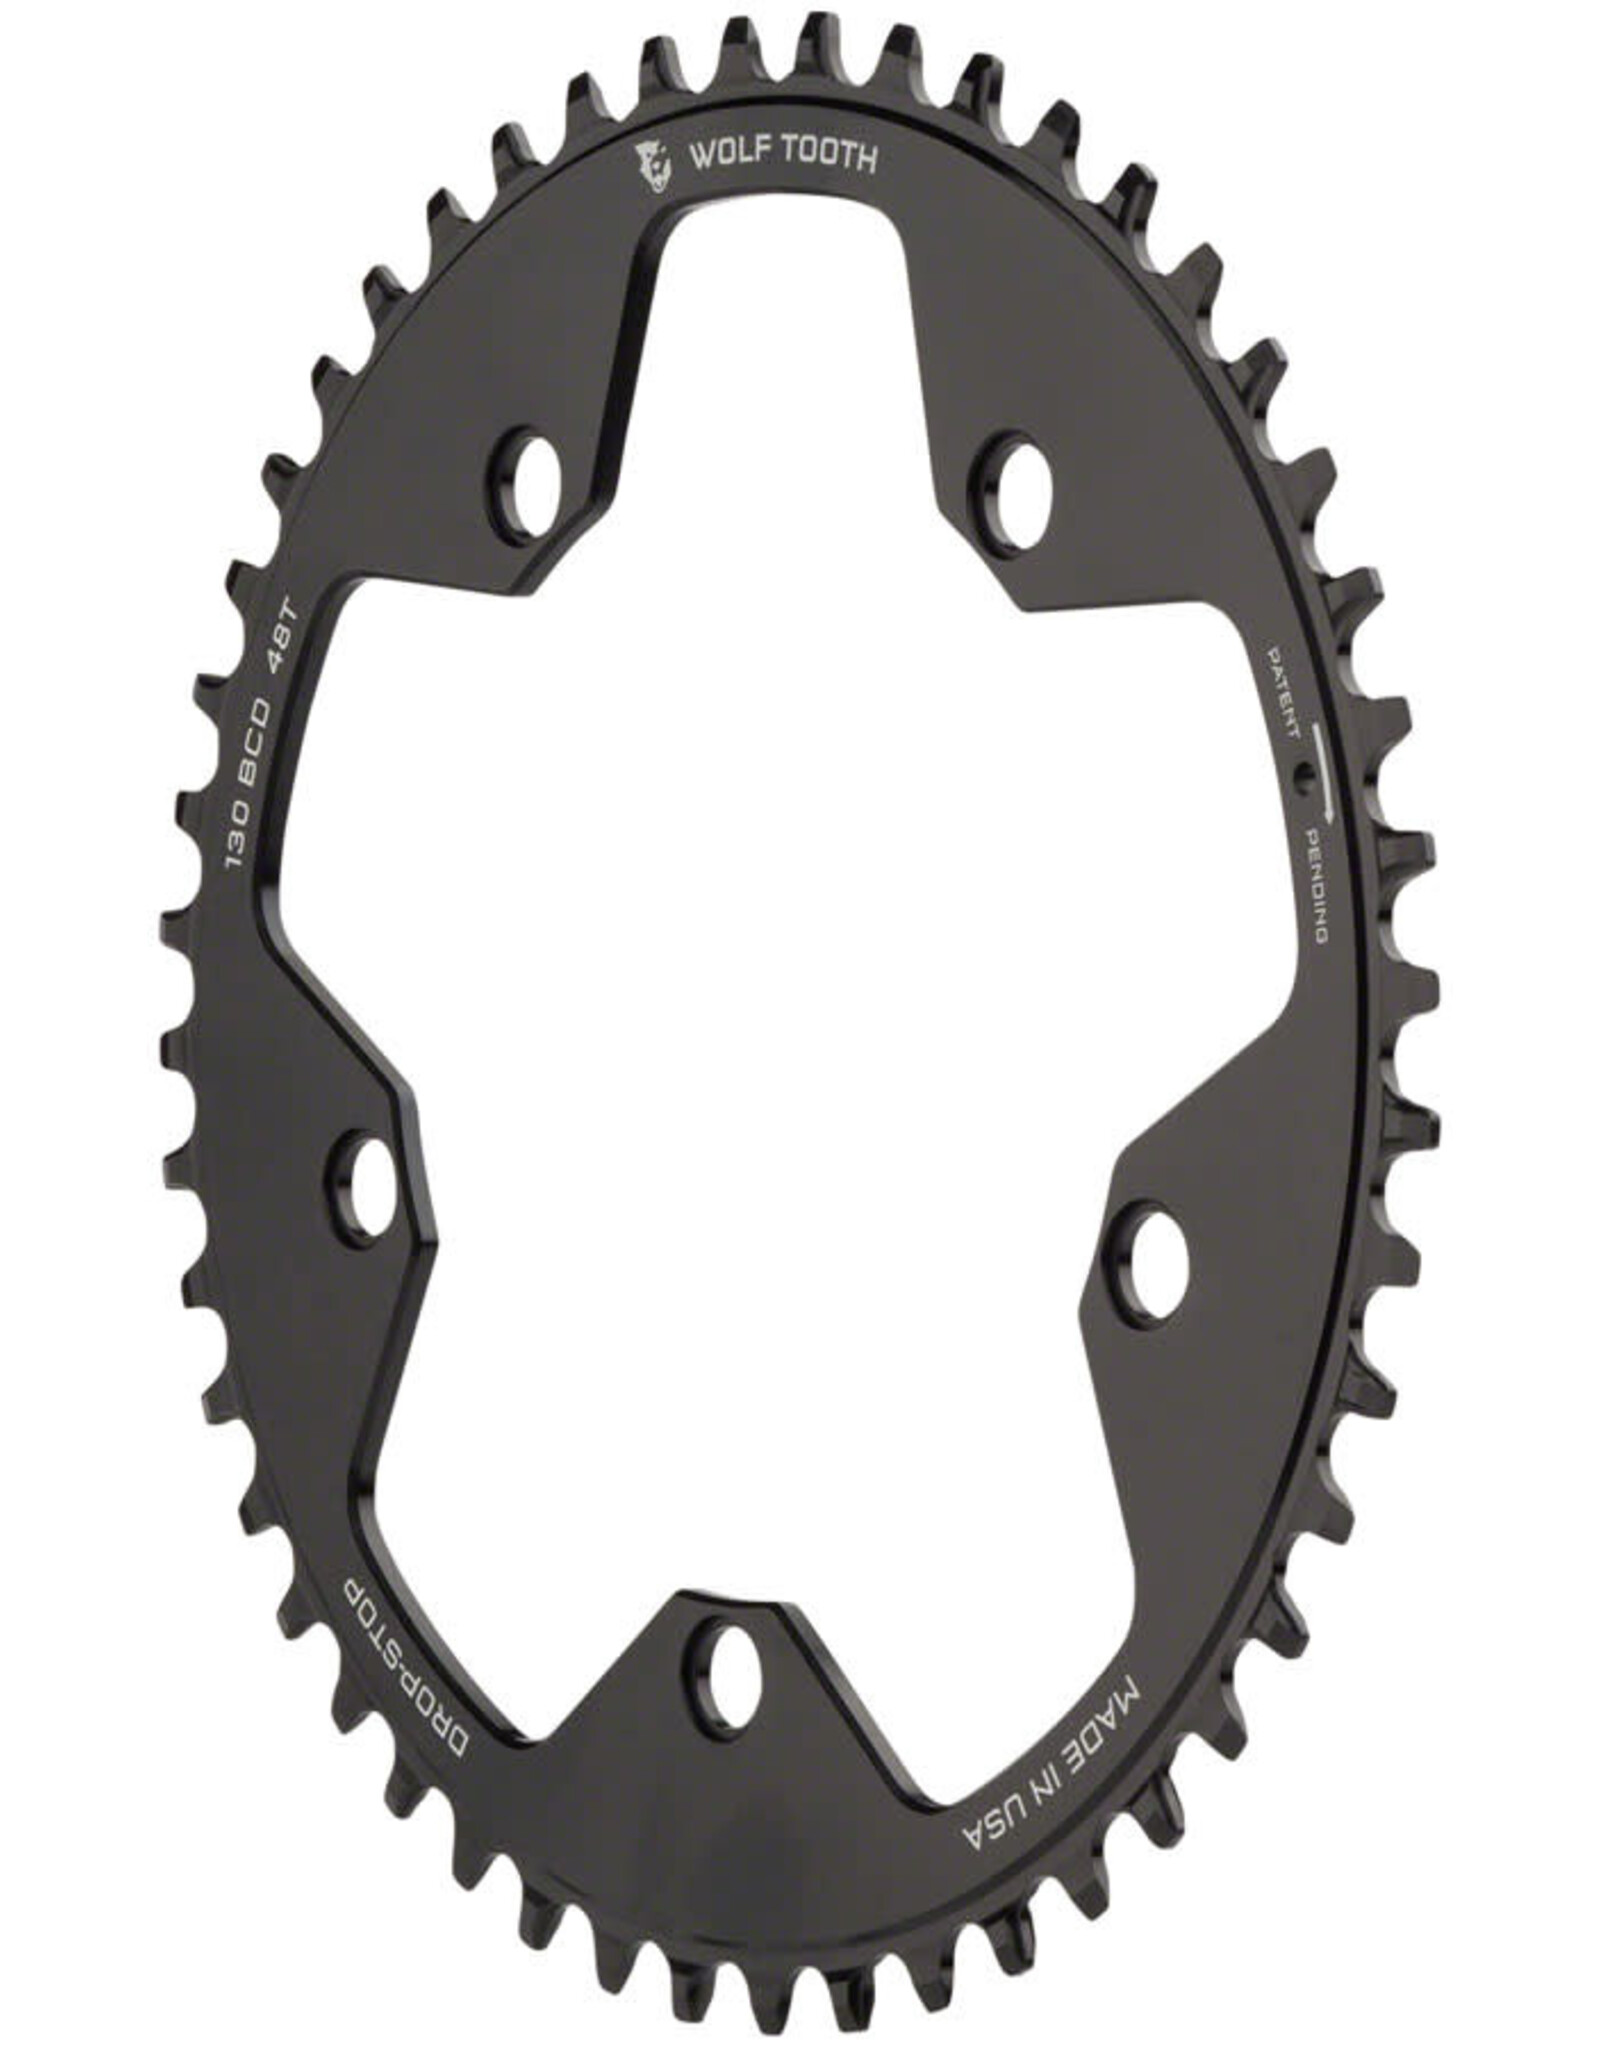 Wolf Tooth Components Wolf Tooth Drop-Stop Chainring 110 BCD 5-Bolt 10/11/12 Speed Black